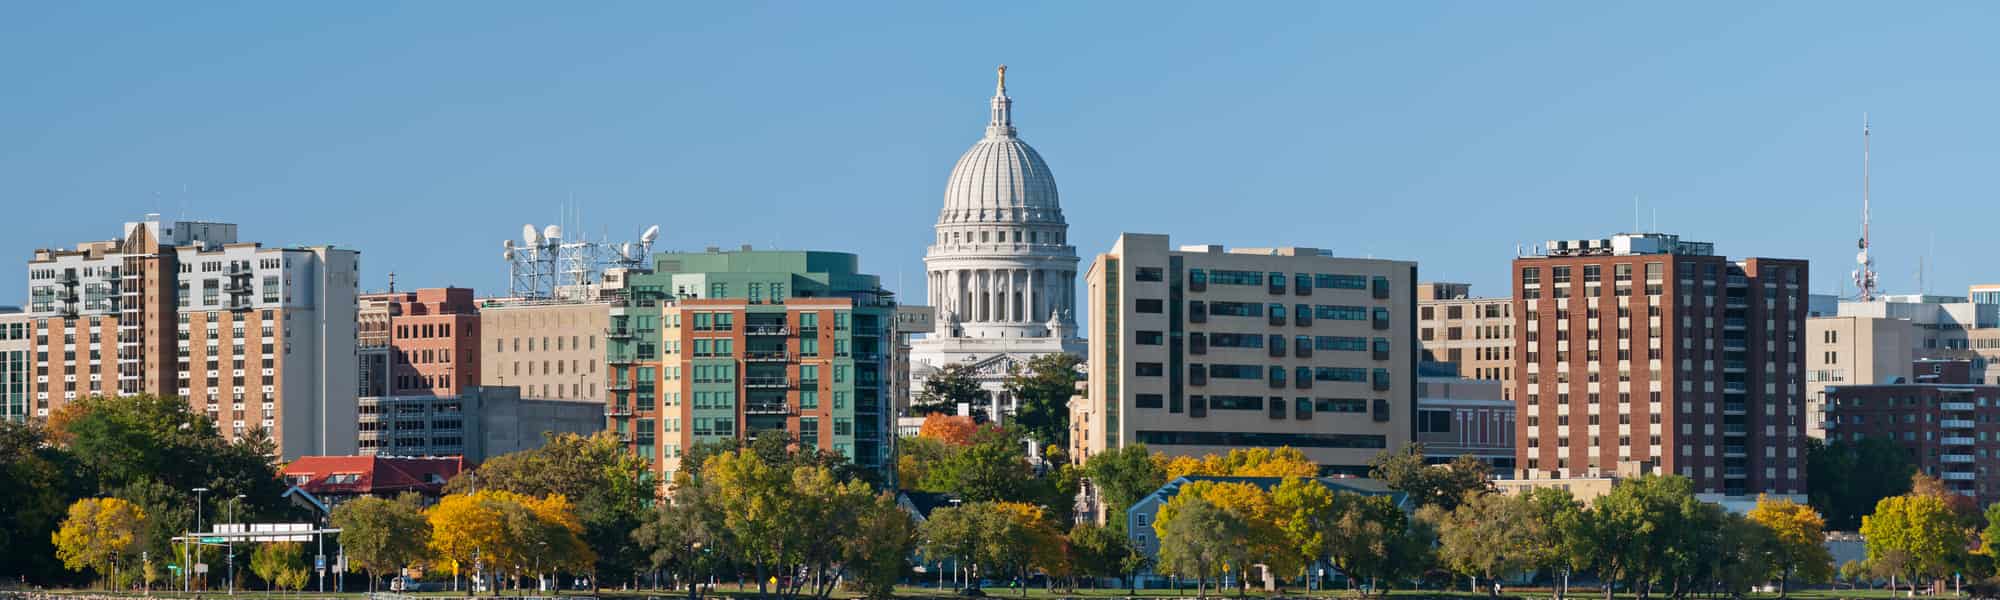 Madison, WI Housing Market Prices, Trends & Forecasts 2022